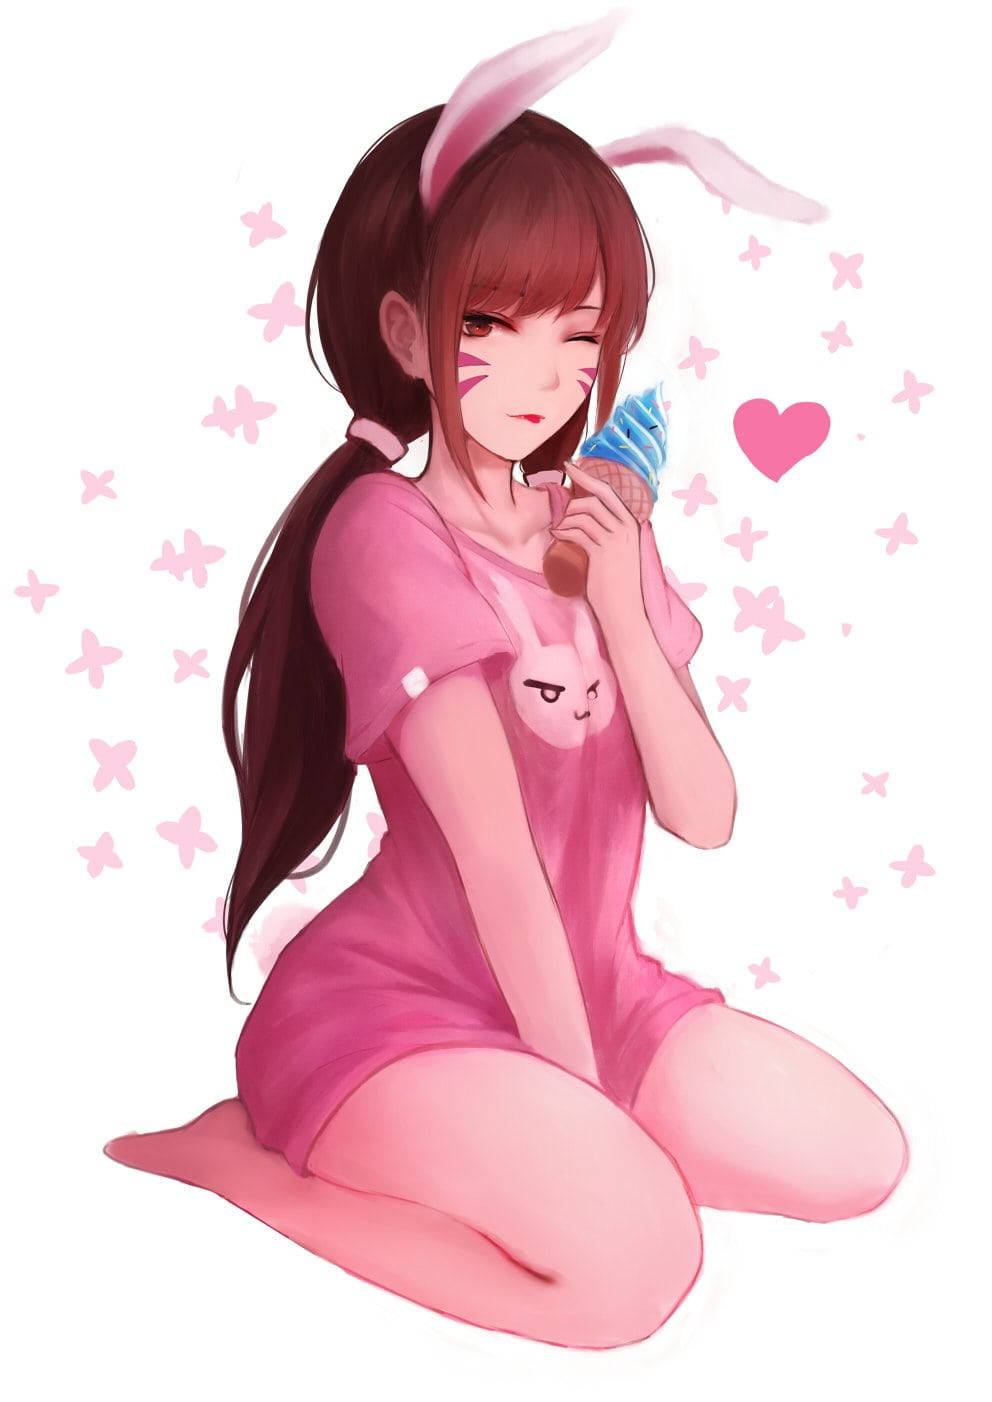 D.va From Overwatch With A Chilling Wink On Phone Wallpaper Wallpaper